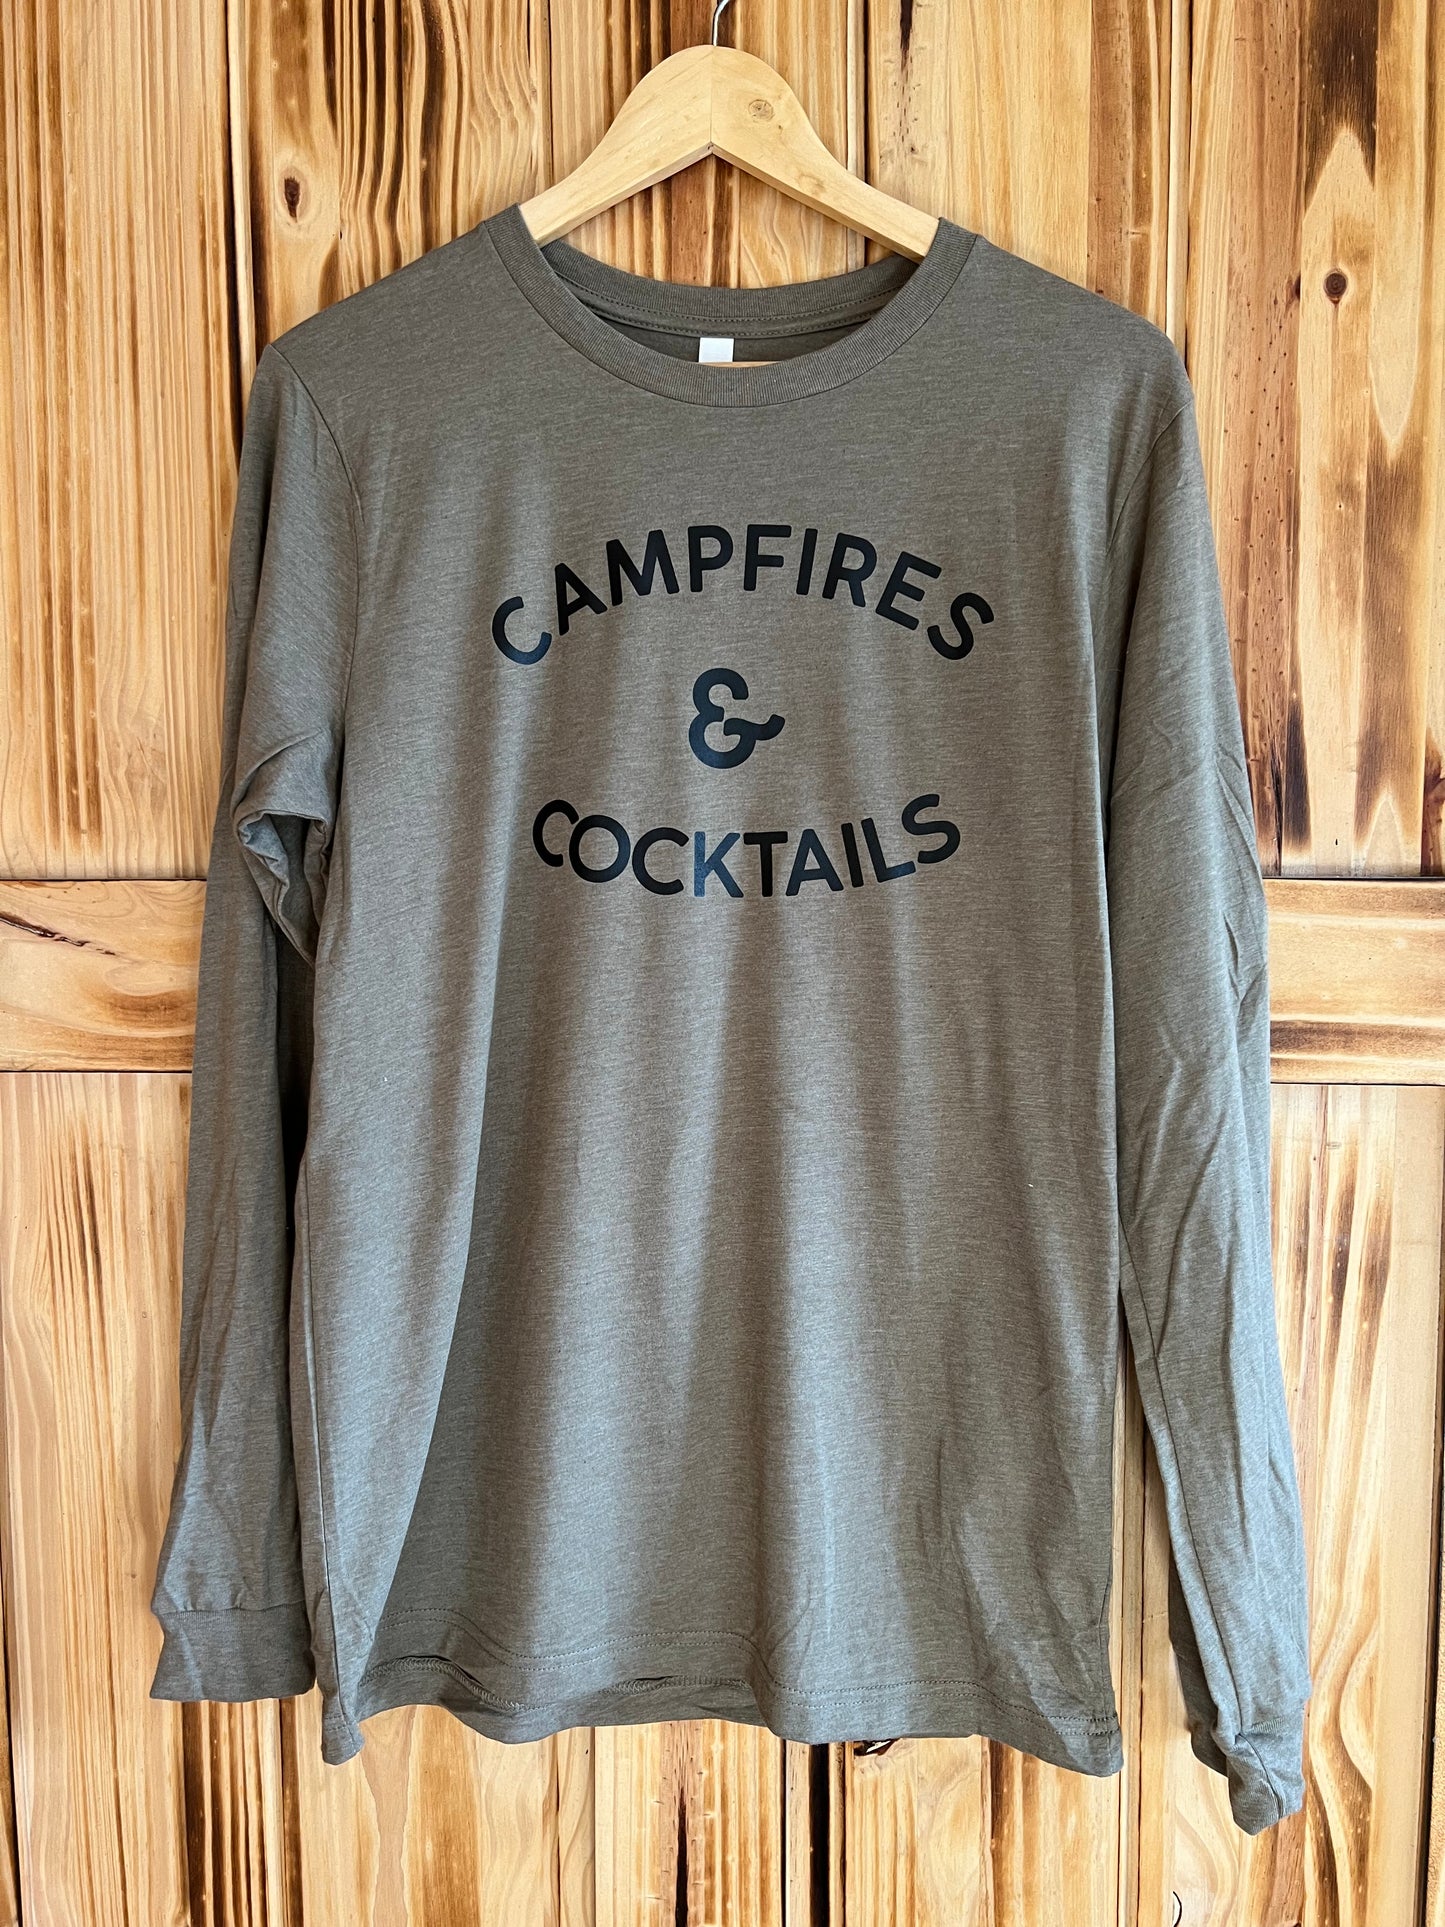 Campfire and Cocktails Long Sleeve T-Shirt